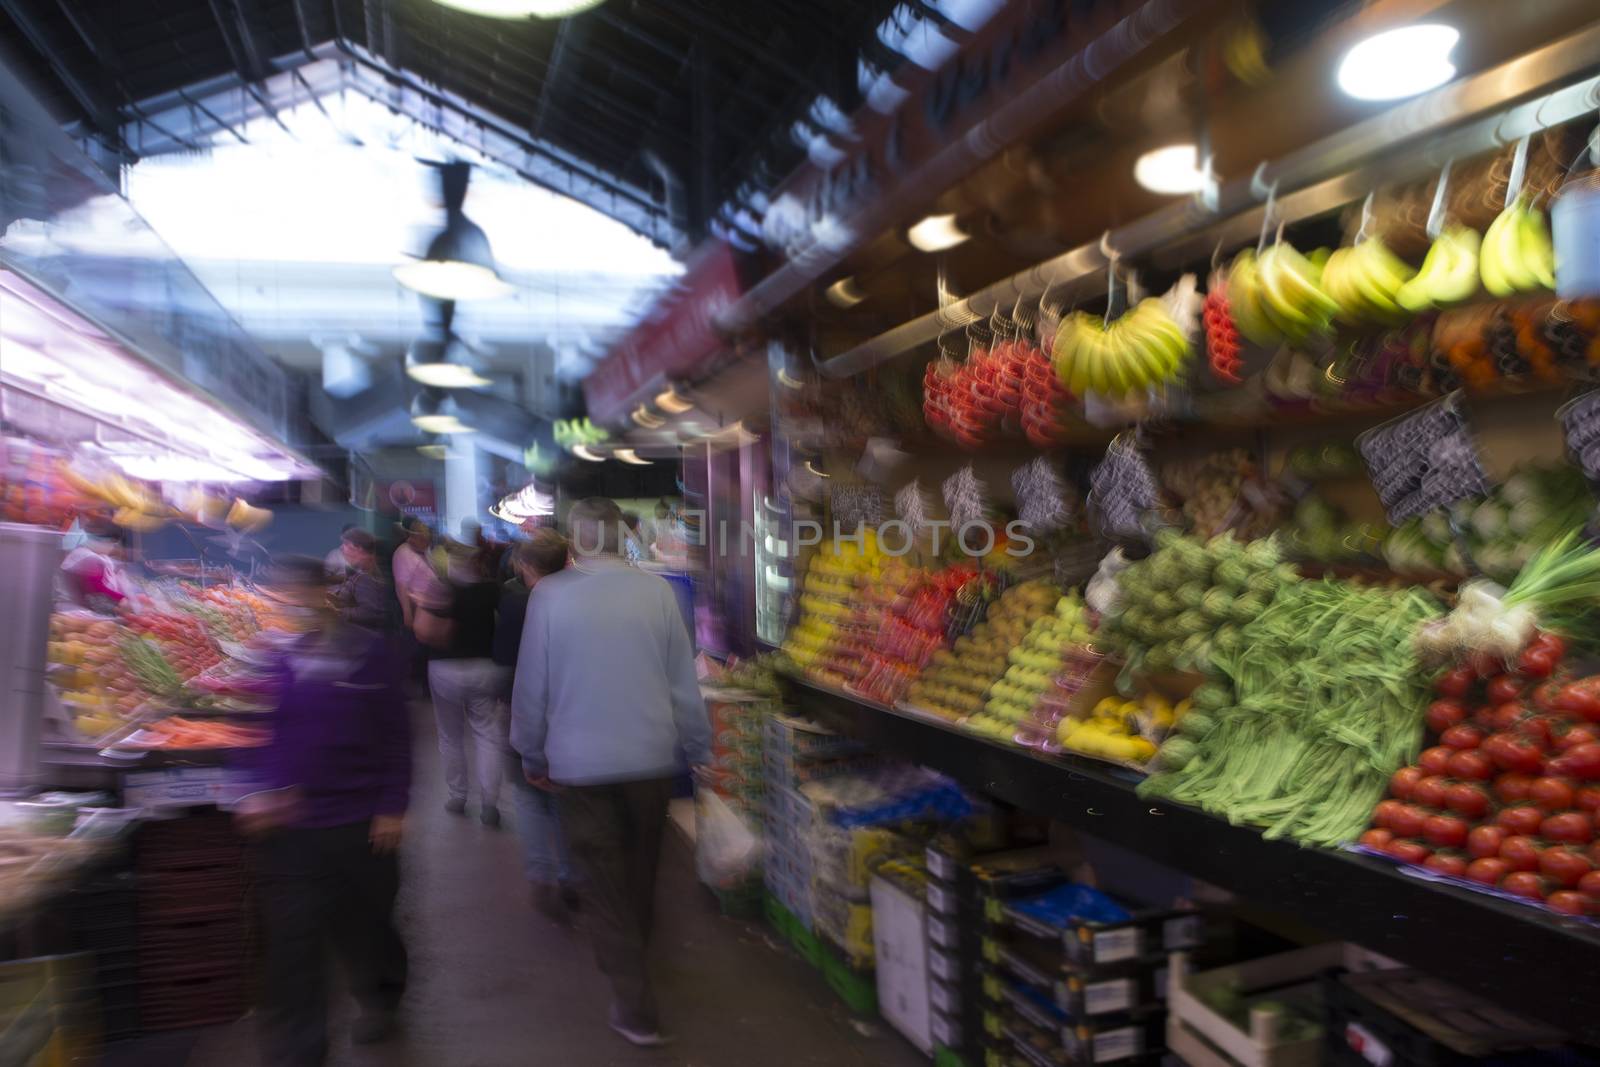 blurry image of fruit and vegetables  in the market